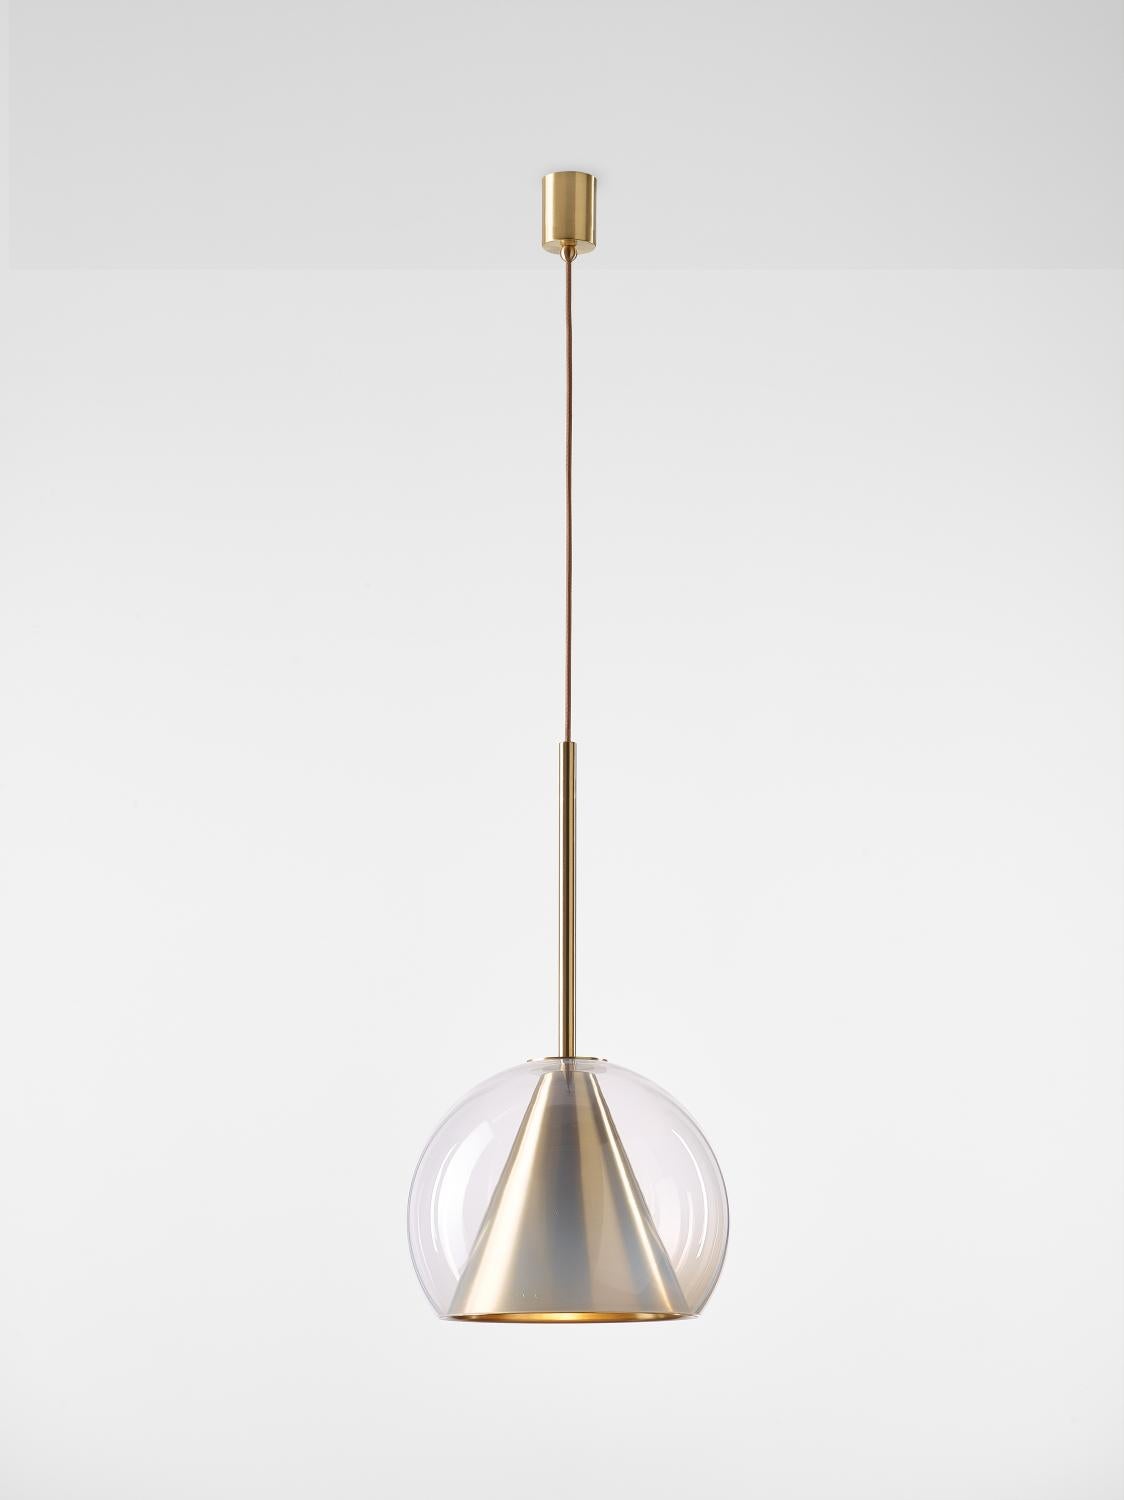 Big Alabaster white Kono pendant light by Dechem Studio
Dimensions: D 35 x H 75 cm
Materials: brass, glass.
Also available: different finishes and colours available,

This collection of suspended light fixtures combines the elementary geometric